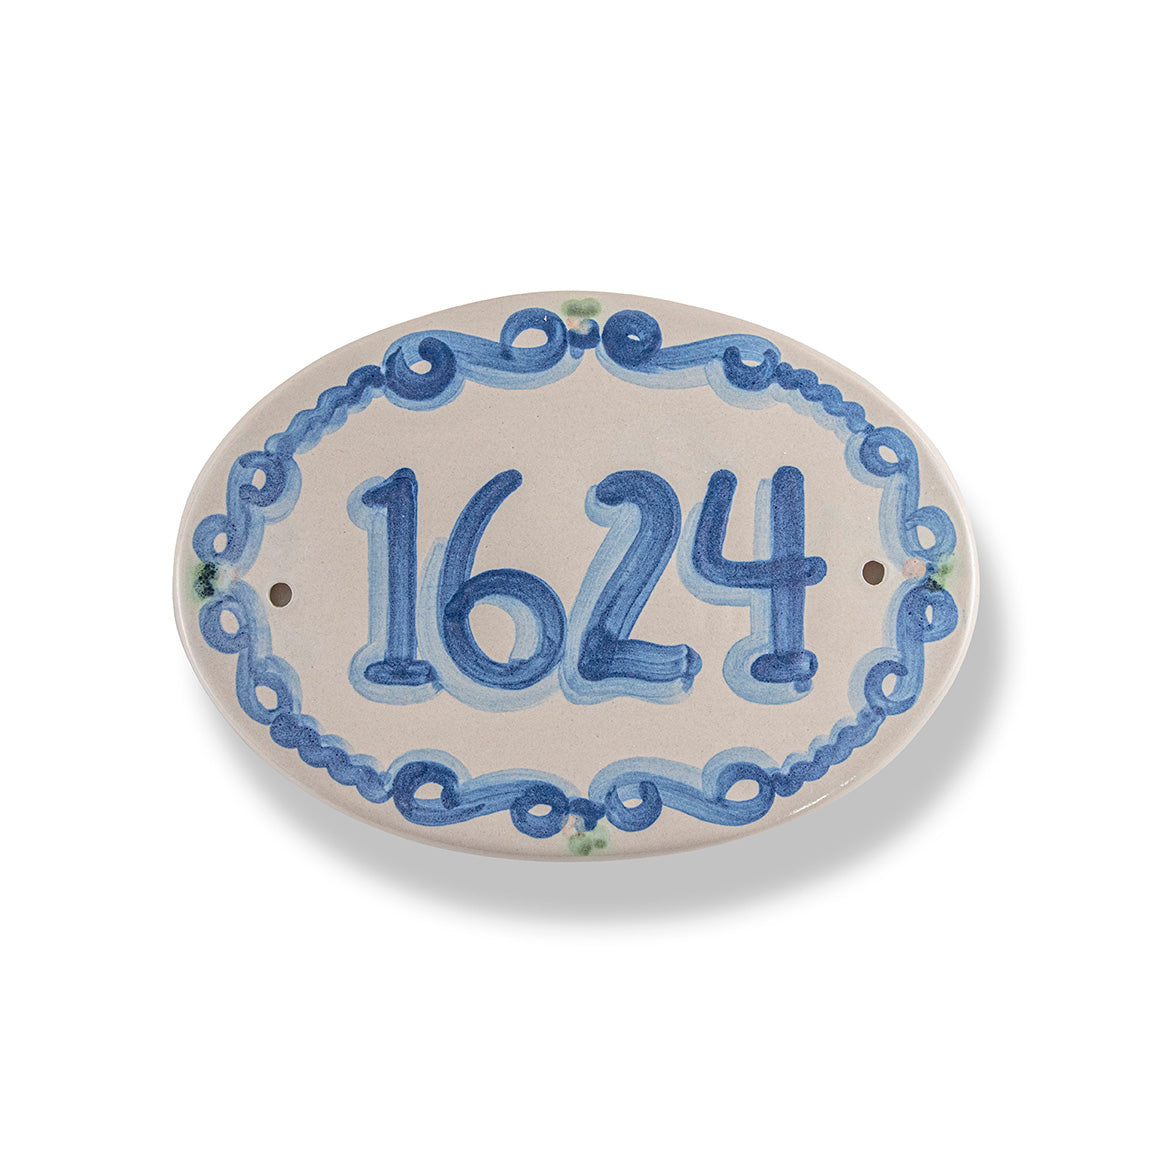 Personalized Small Oval Plaque